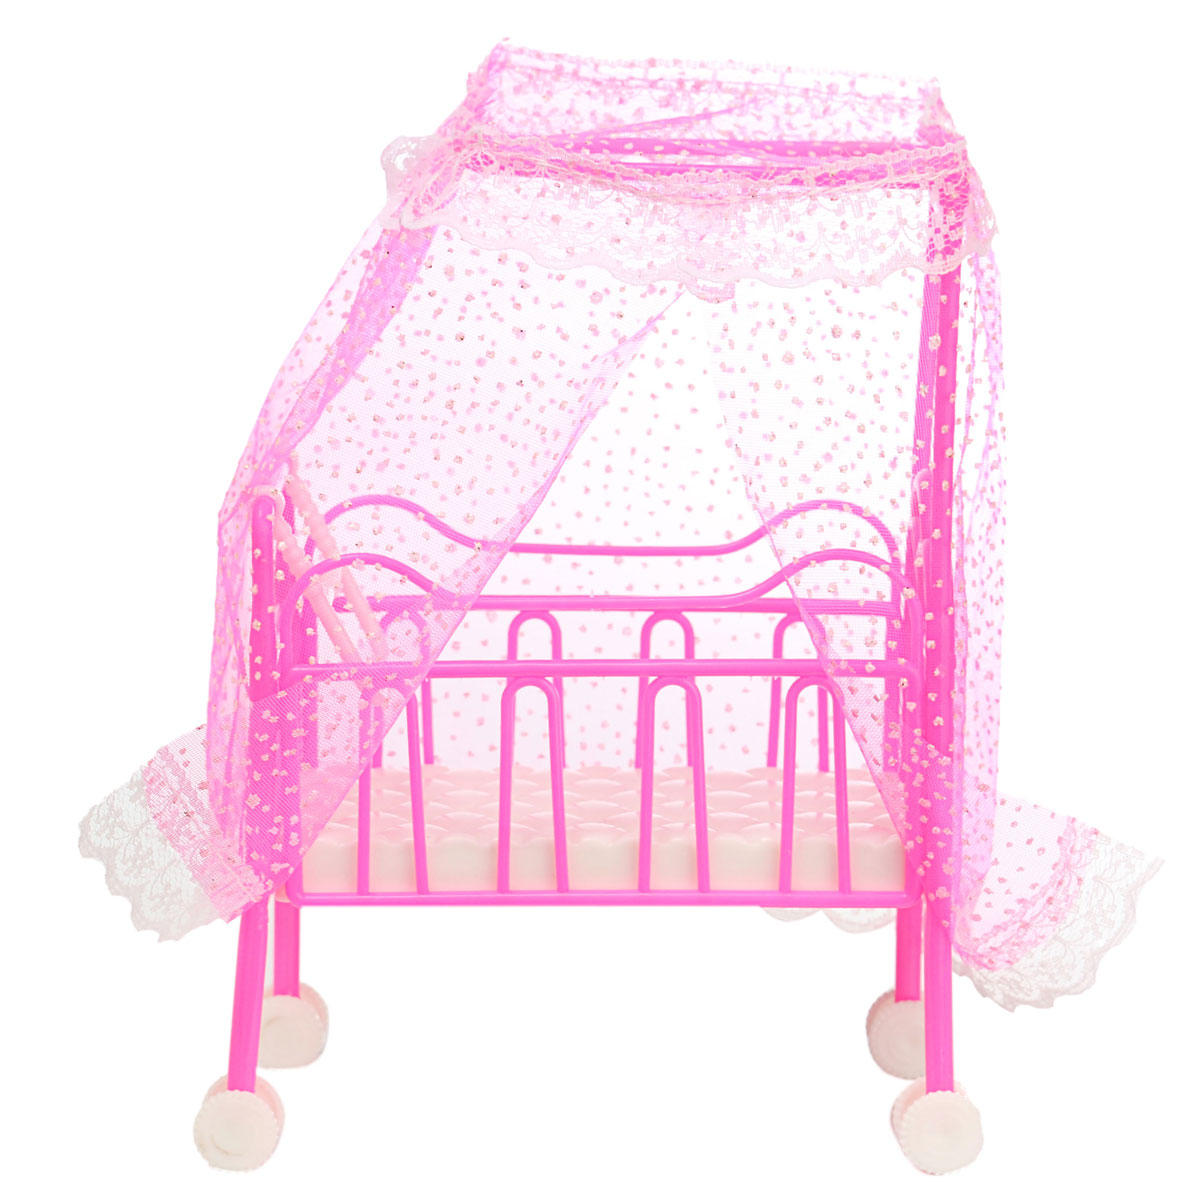 Plastic Baby Bed Miniature Dollhouse Toy Bedroom Furniture Doll a